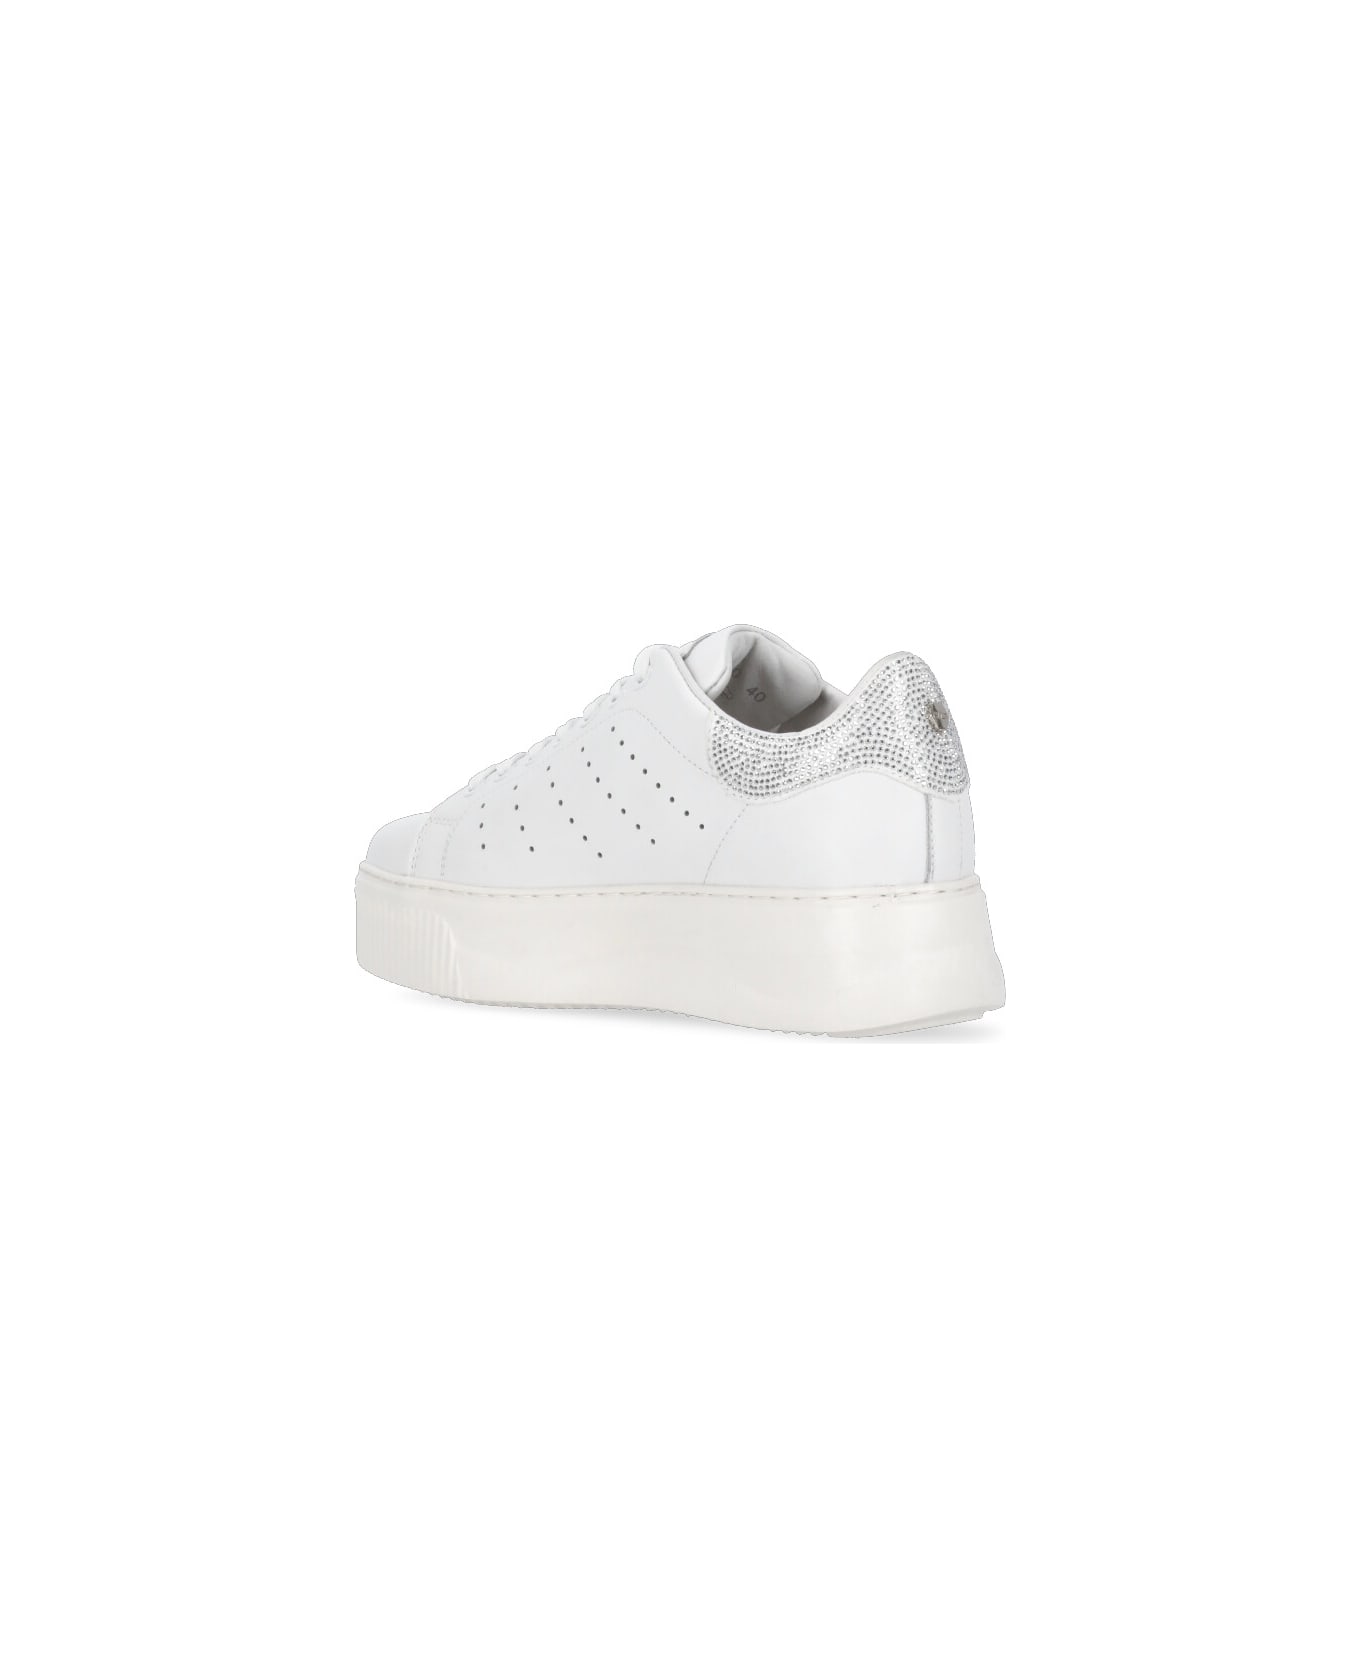 Cult Perry 3162 Sneakers - White